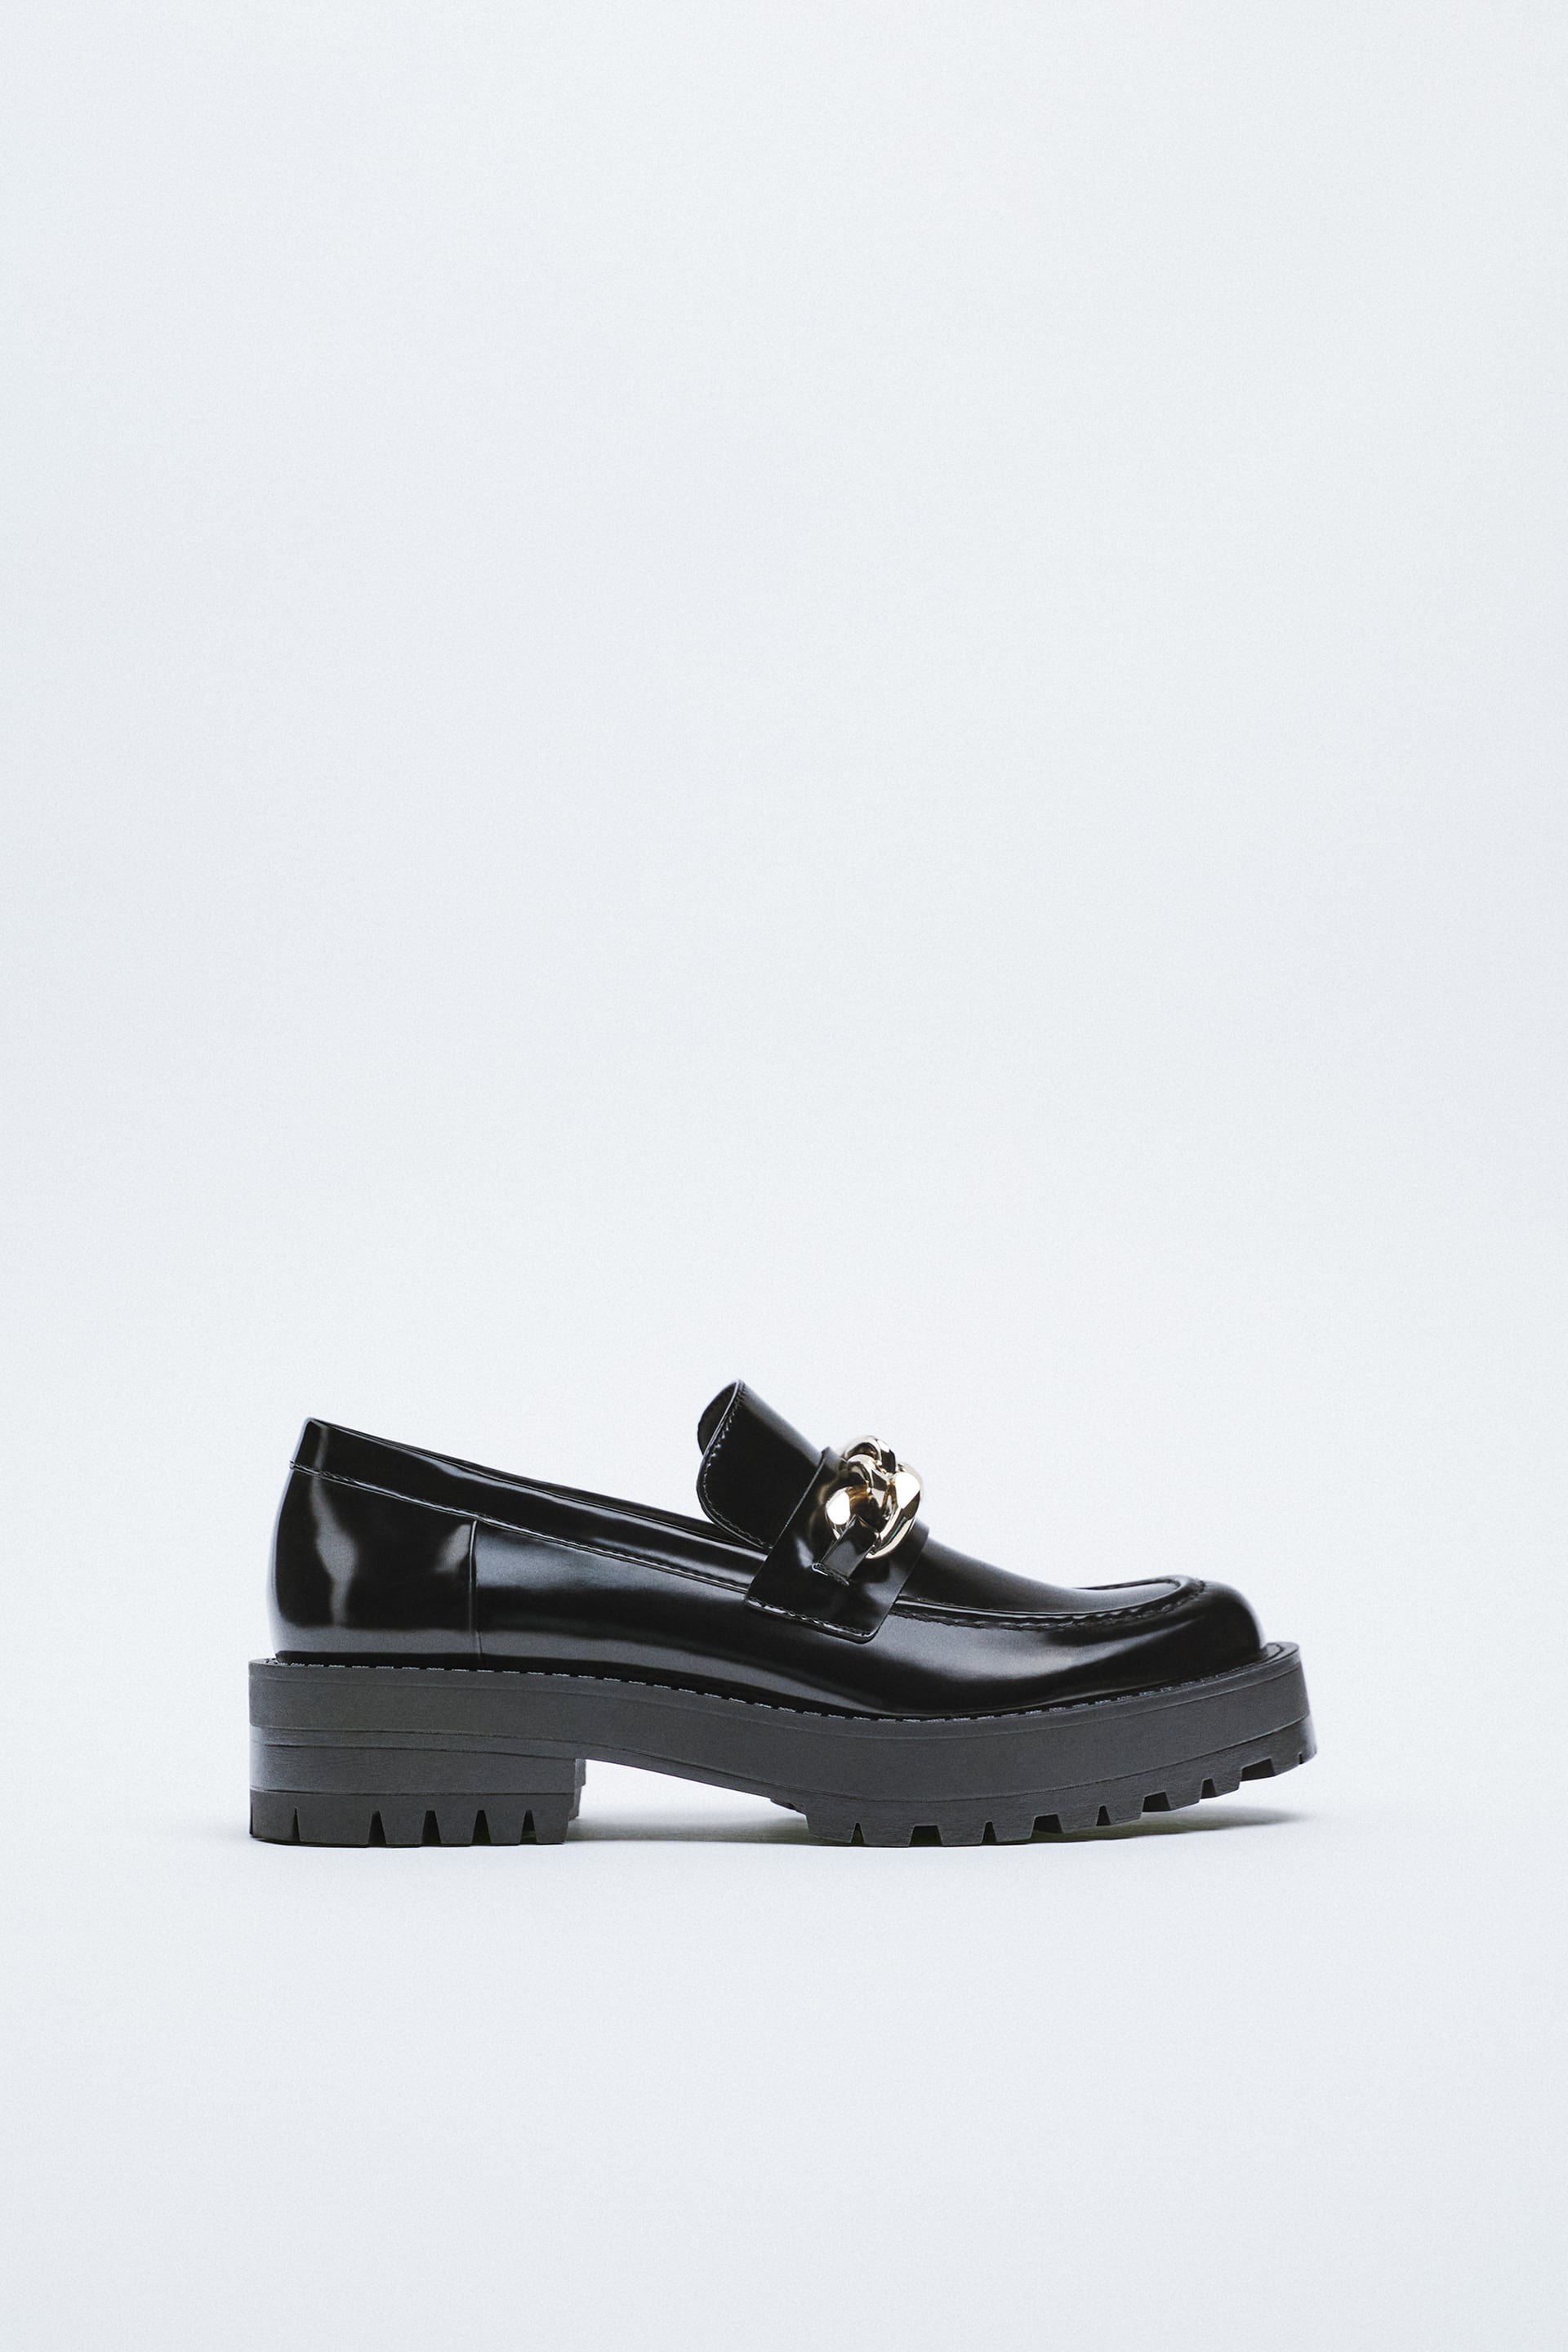 Zara Loafers With Chain Detail